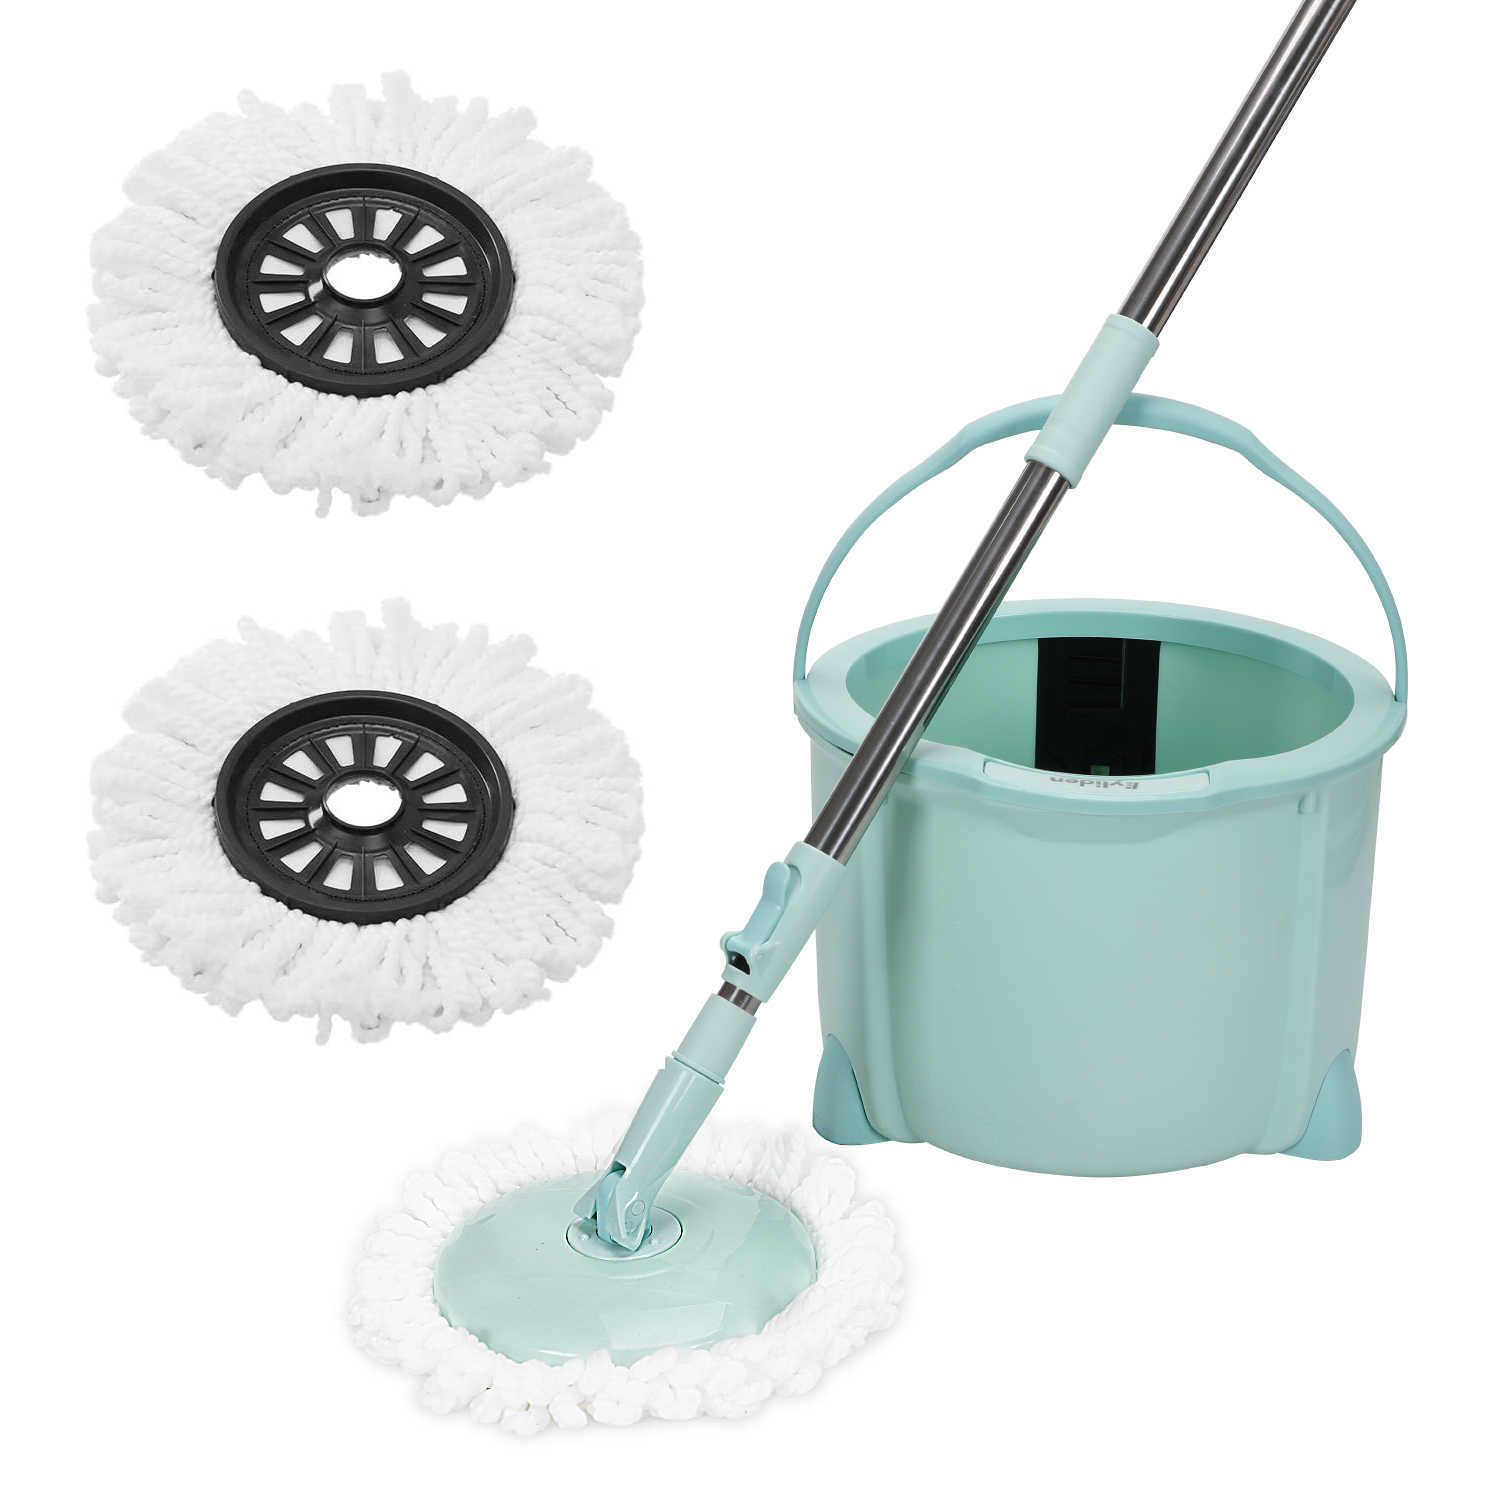 Eyliden Spin Mop Bucket Microfiber Spinning with 2 Heads 360 Rotating Adjustable Handle for Home Cleaning 210805